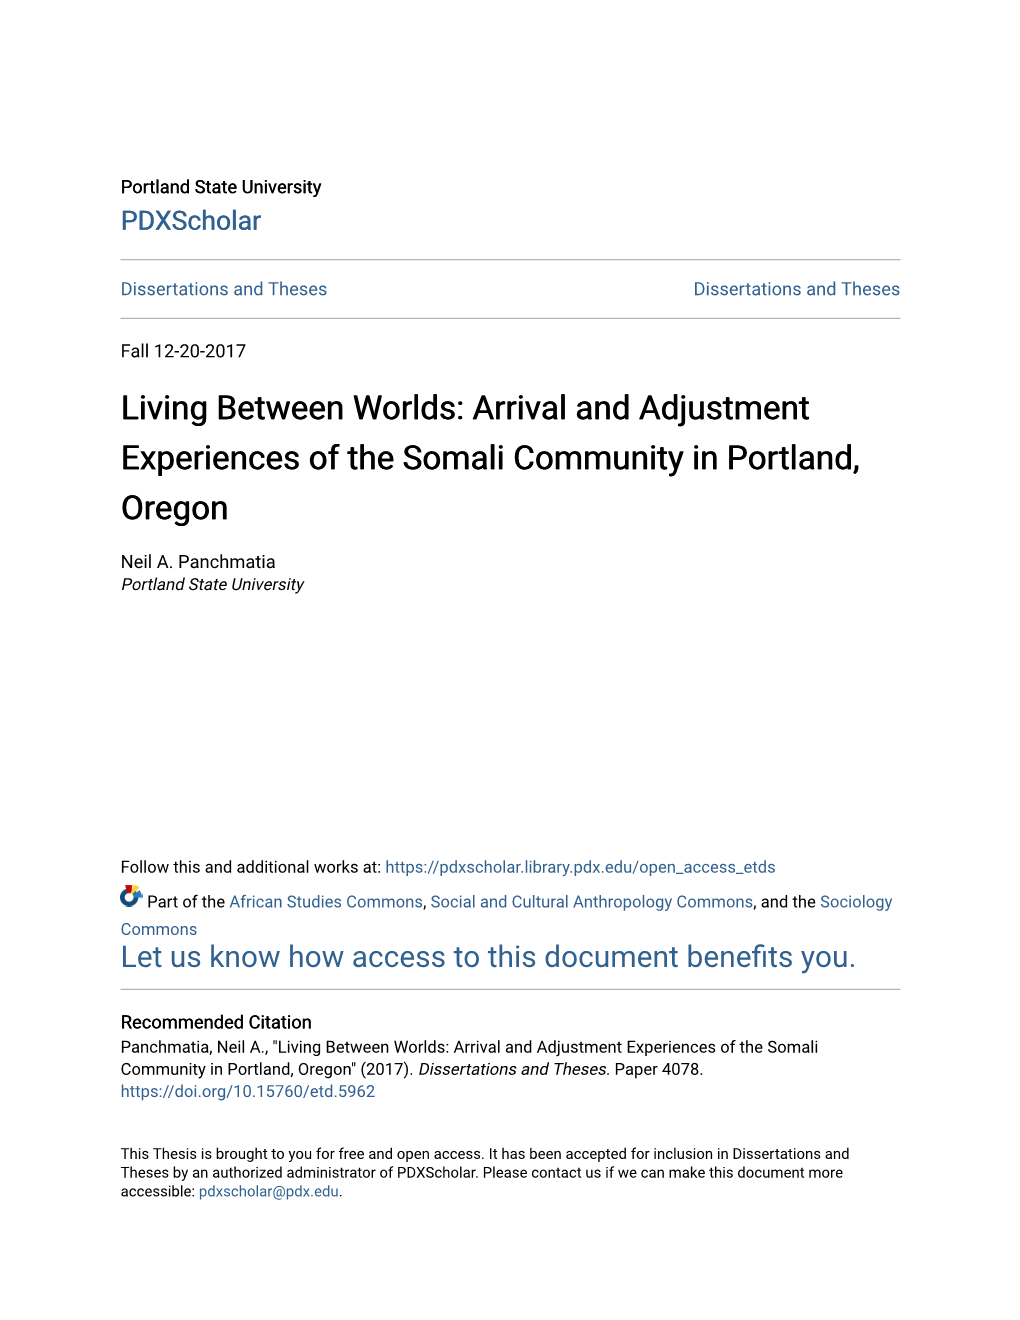 Living Between Worlds: Arrival and Adjustment Experiences of the Somali Community in Portland, Oregon